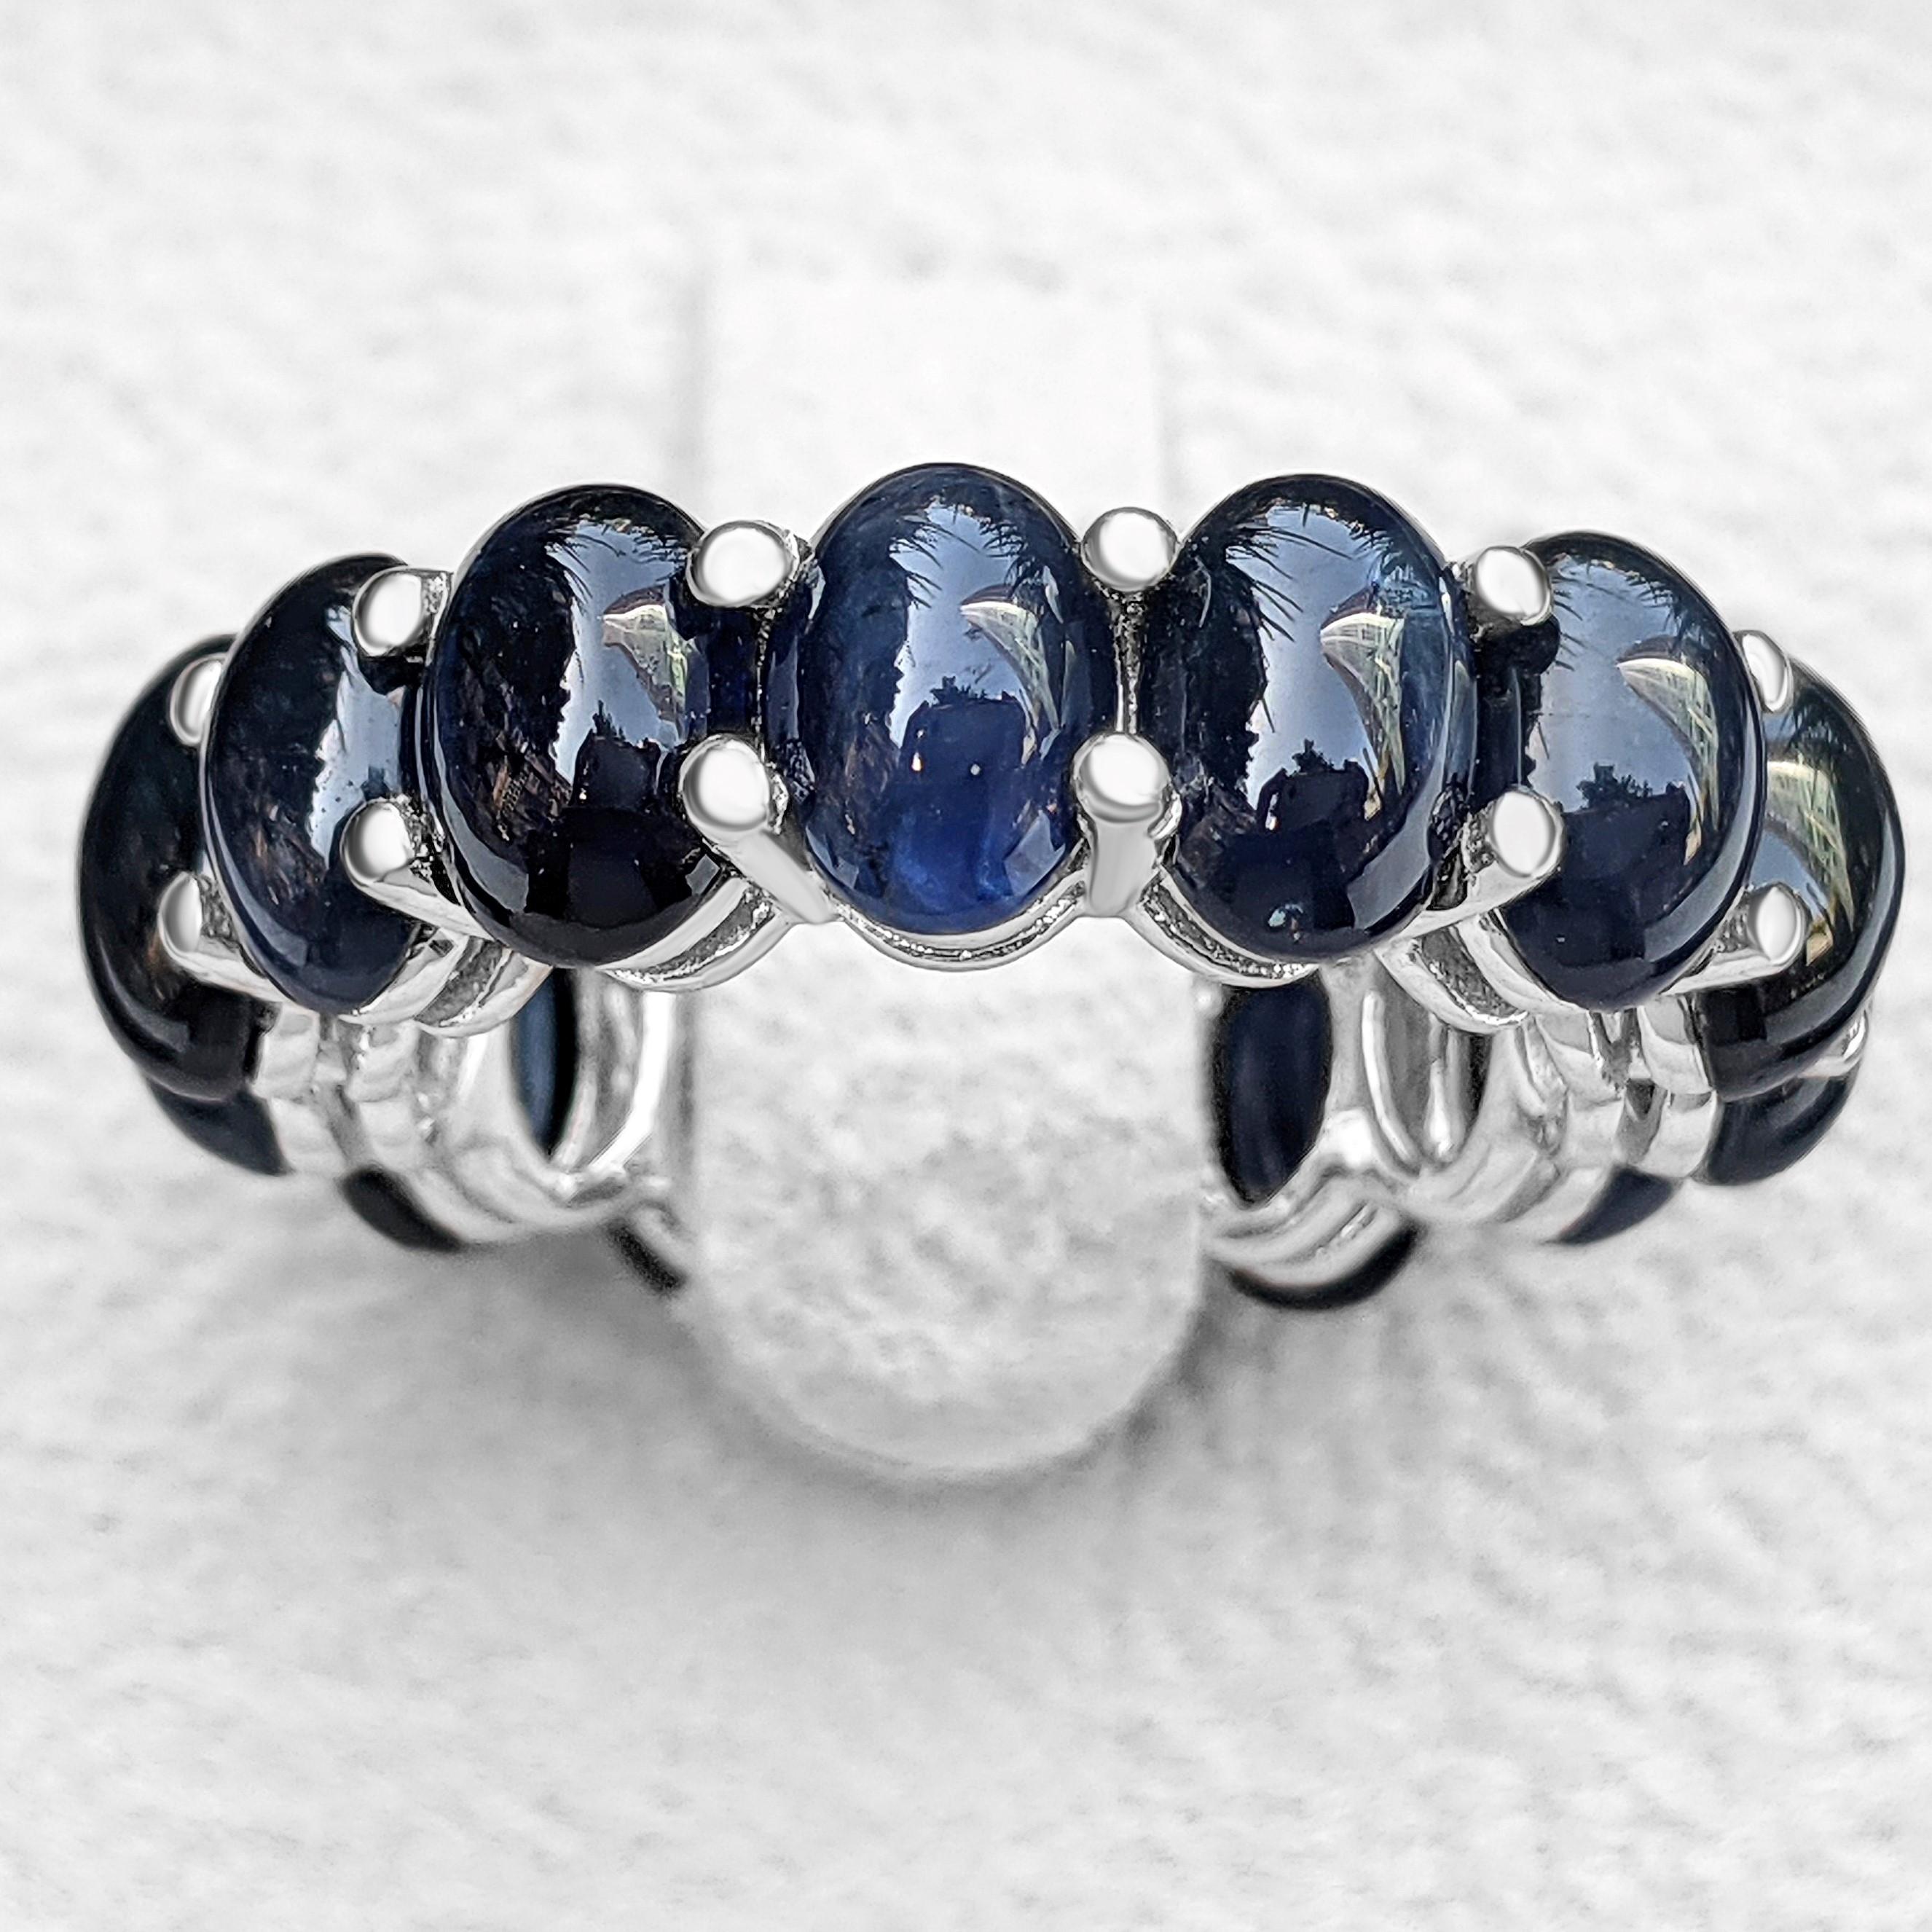 Women's $1 NO RESERVE! - 15.35 Carat Natural Sapphire Eternity Band, 14K White Gold Ring